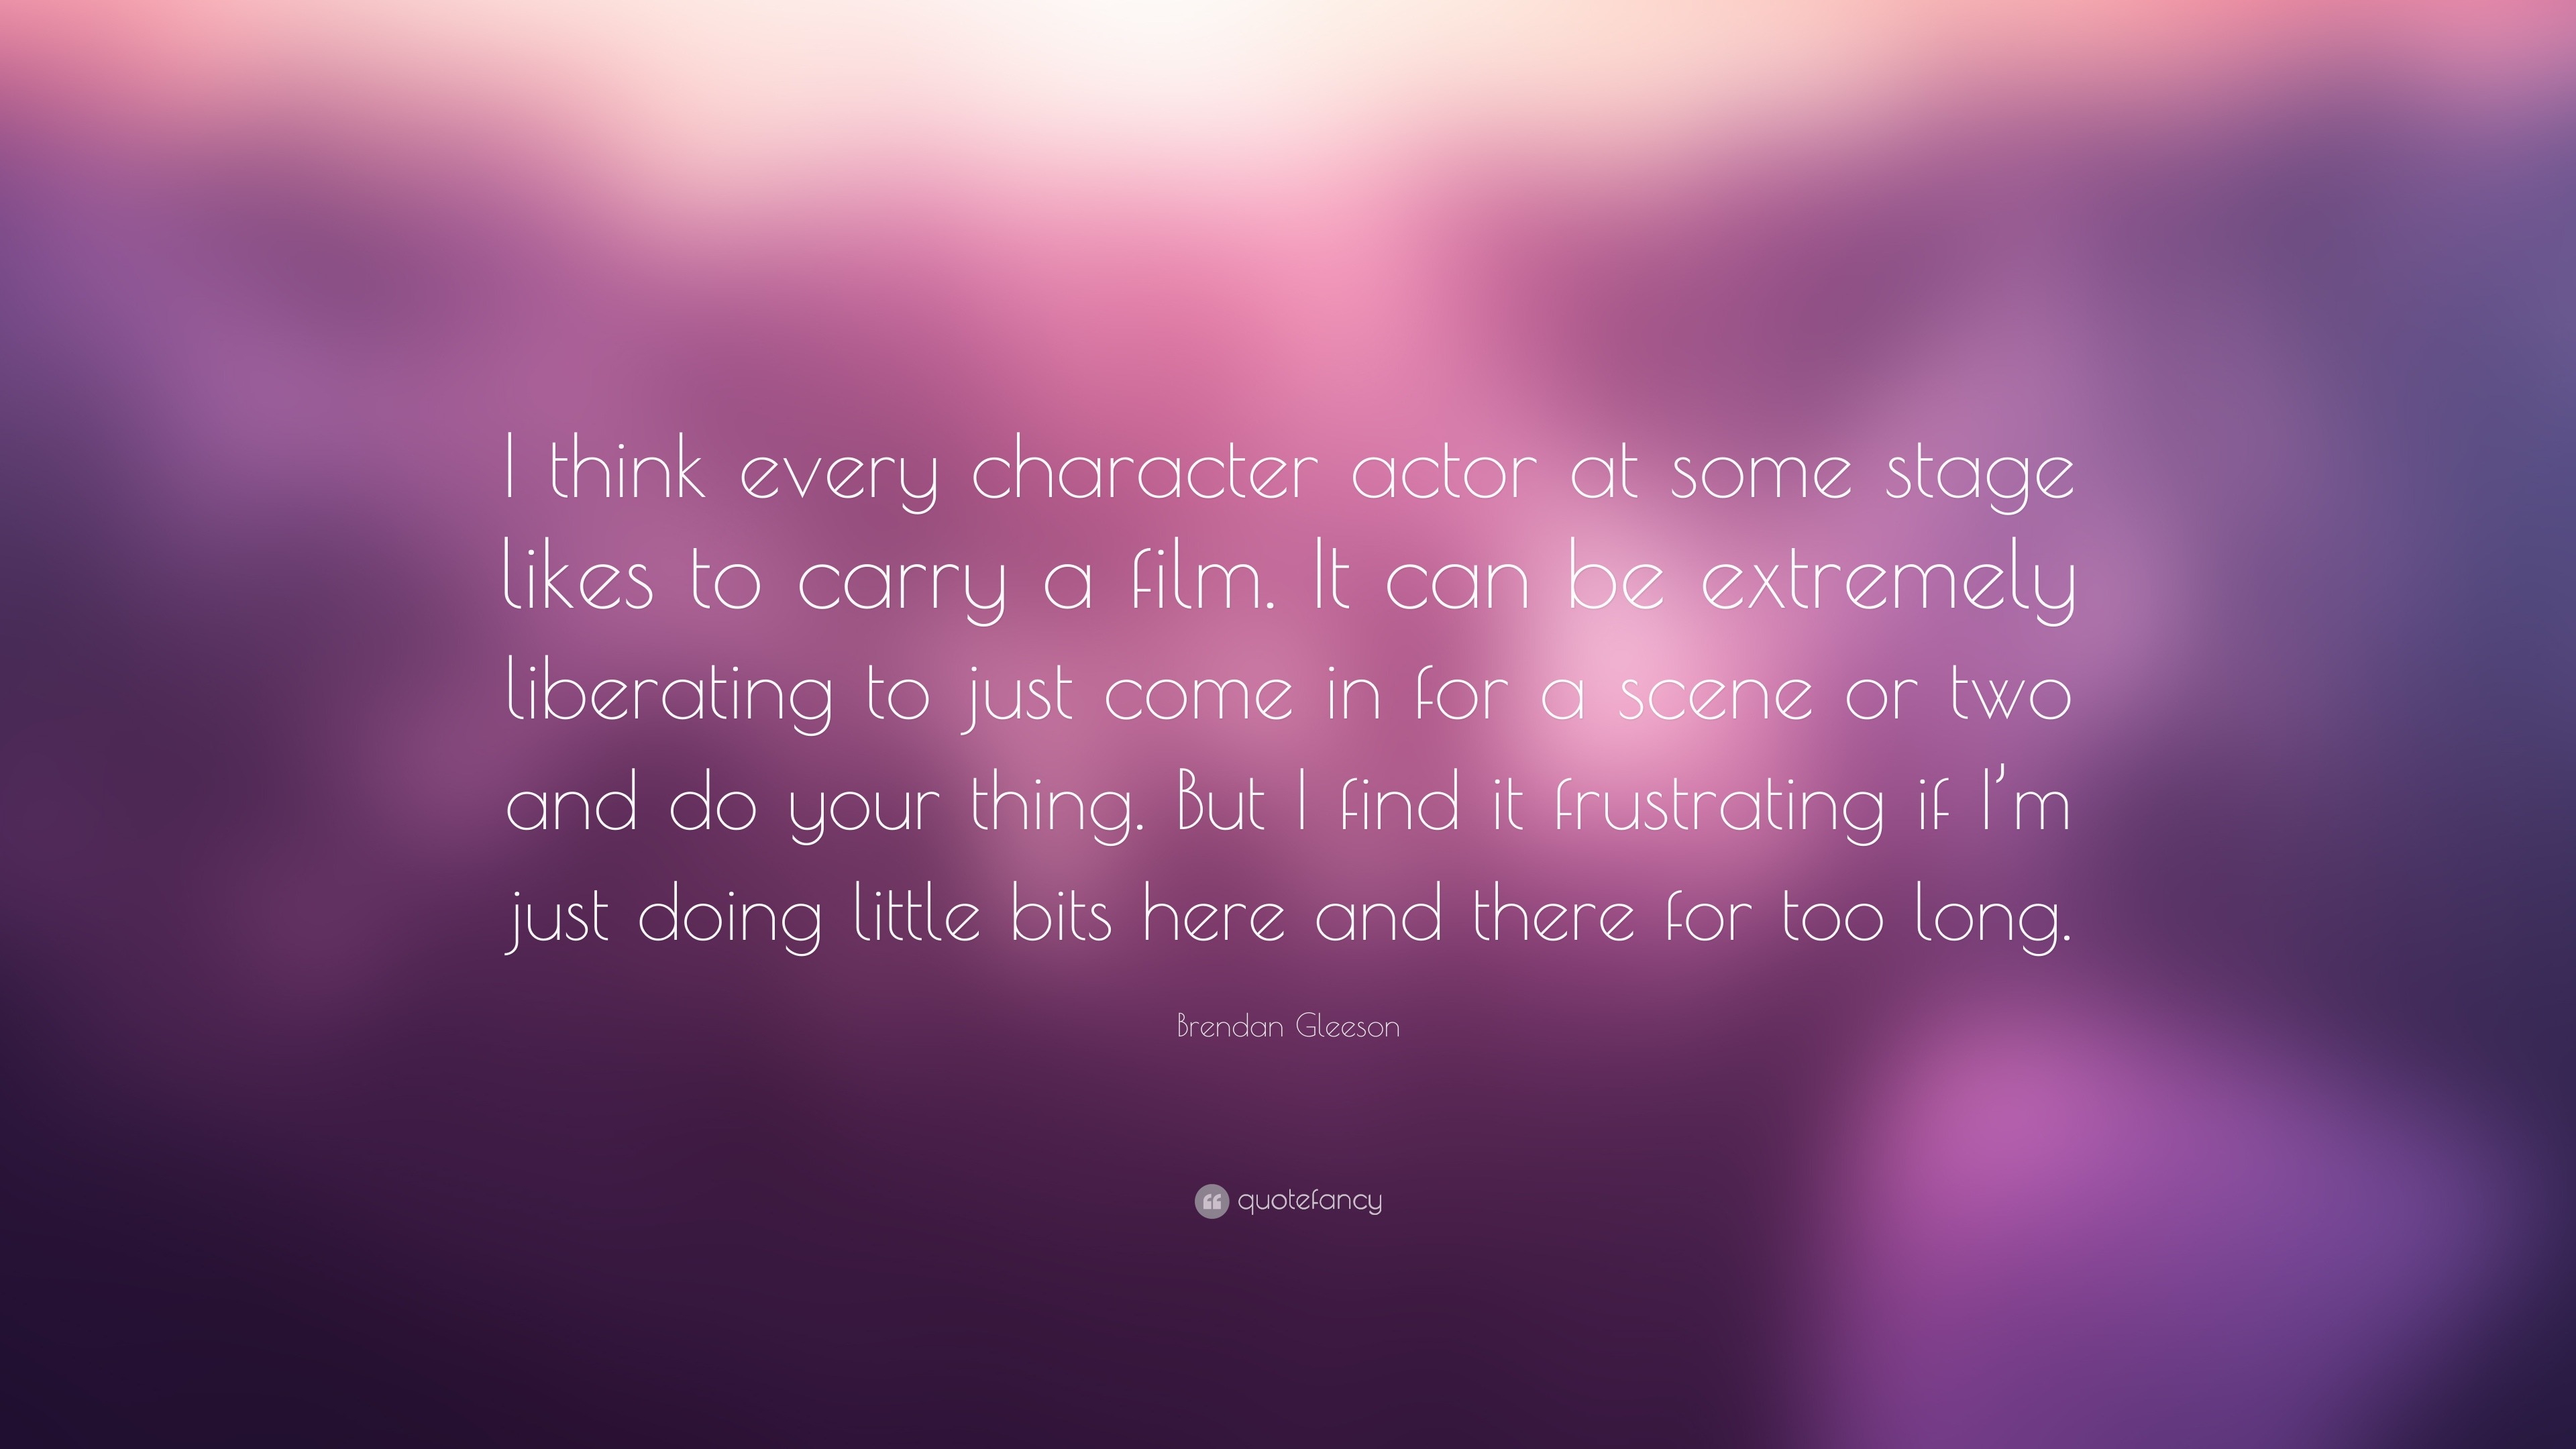 Brendan Gleeson Quote: “I think every character actor at some stage ...